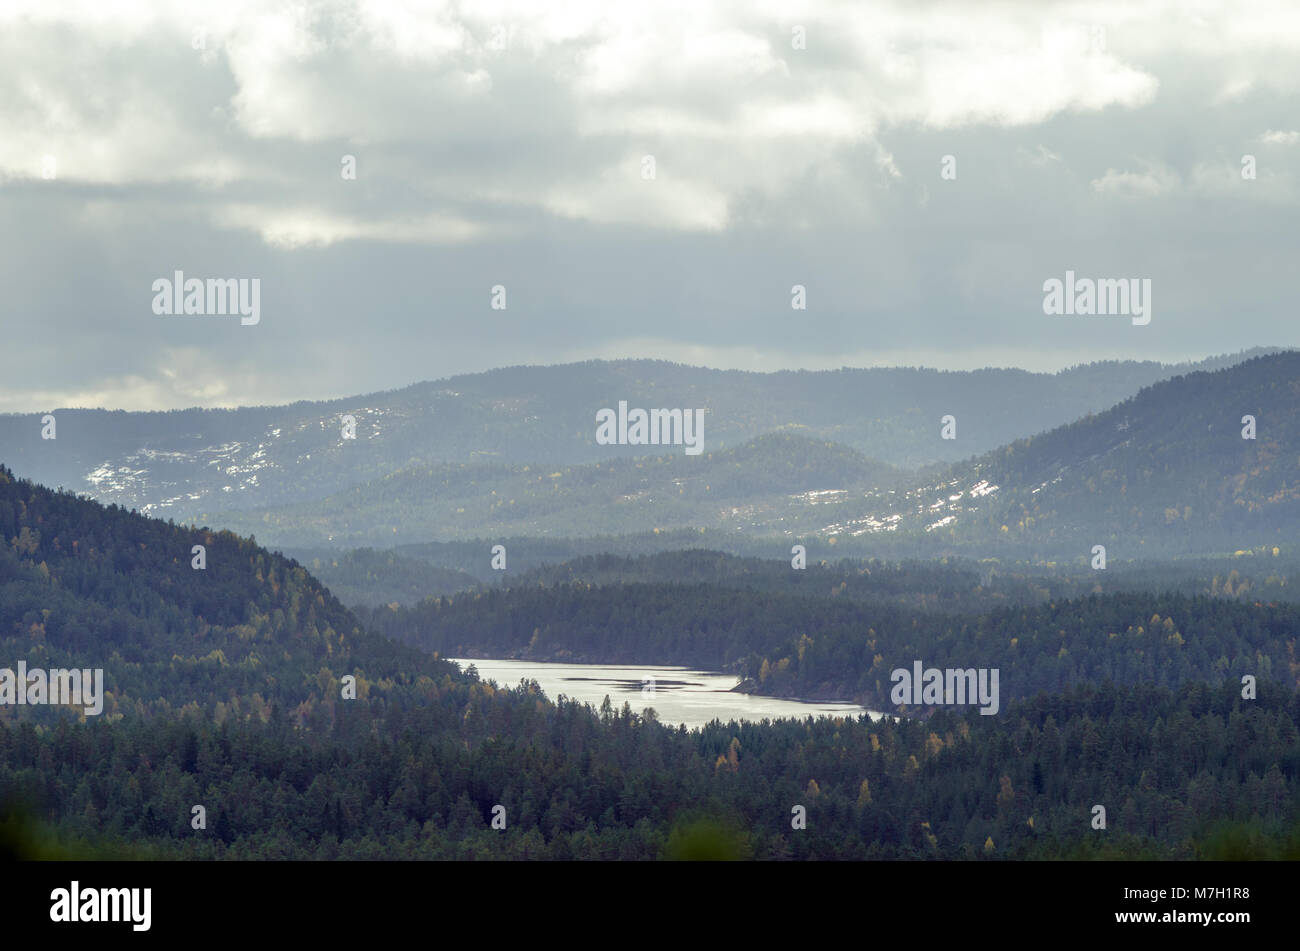 Landscape of middle mountain in Evje, central Norway. Stock Photo